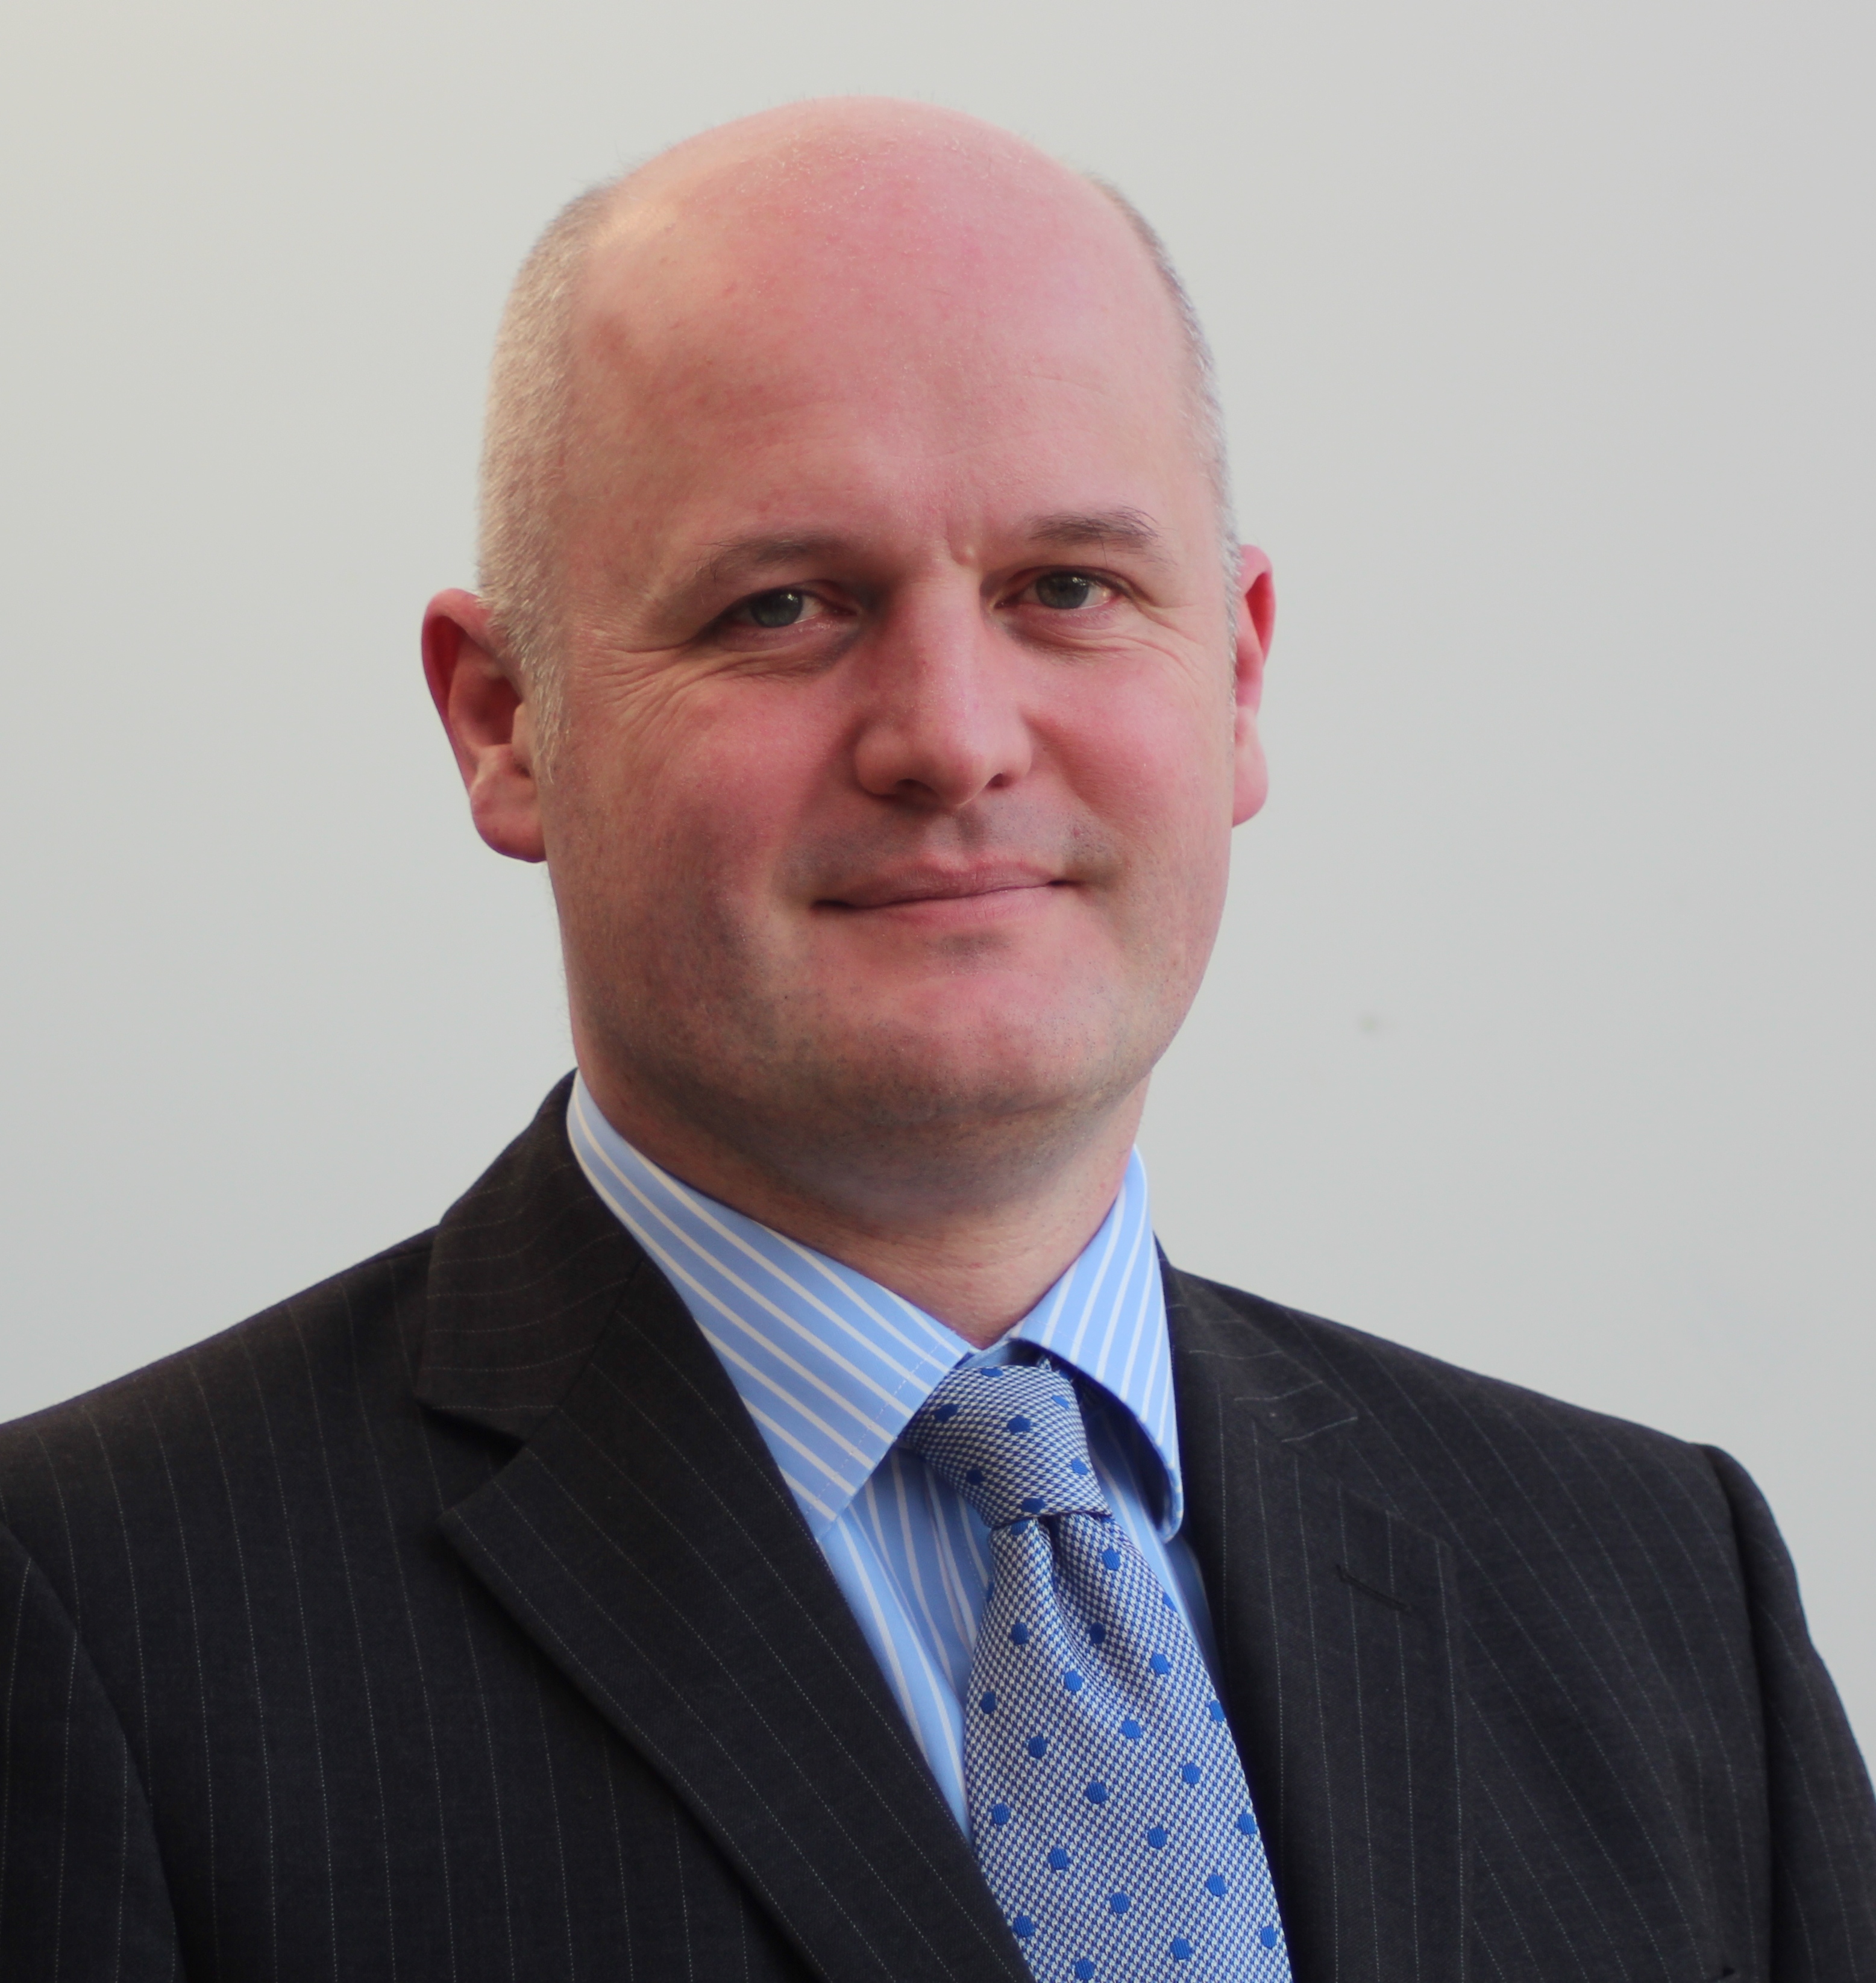 Dr Andrew Whiteley, GP and Managing Director of Lexacom Digital Dictation